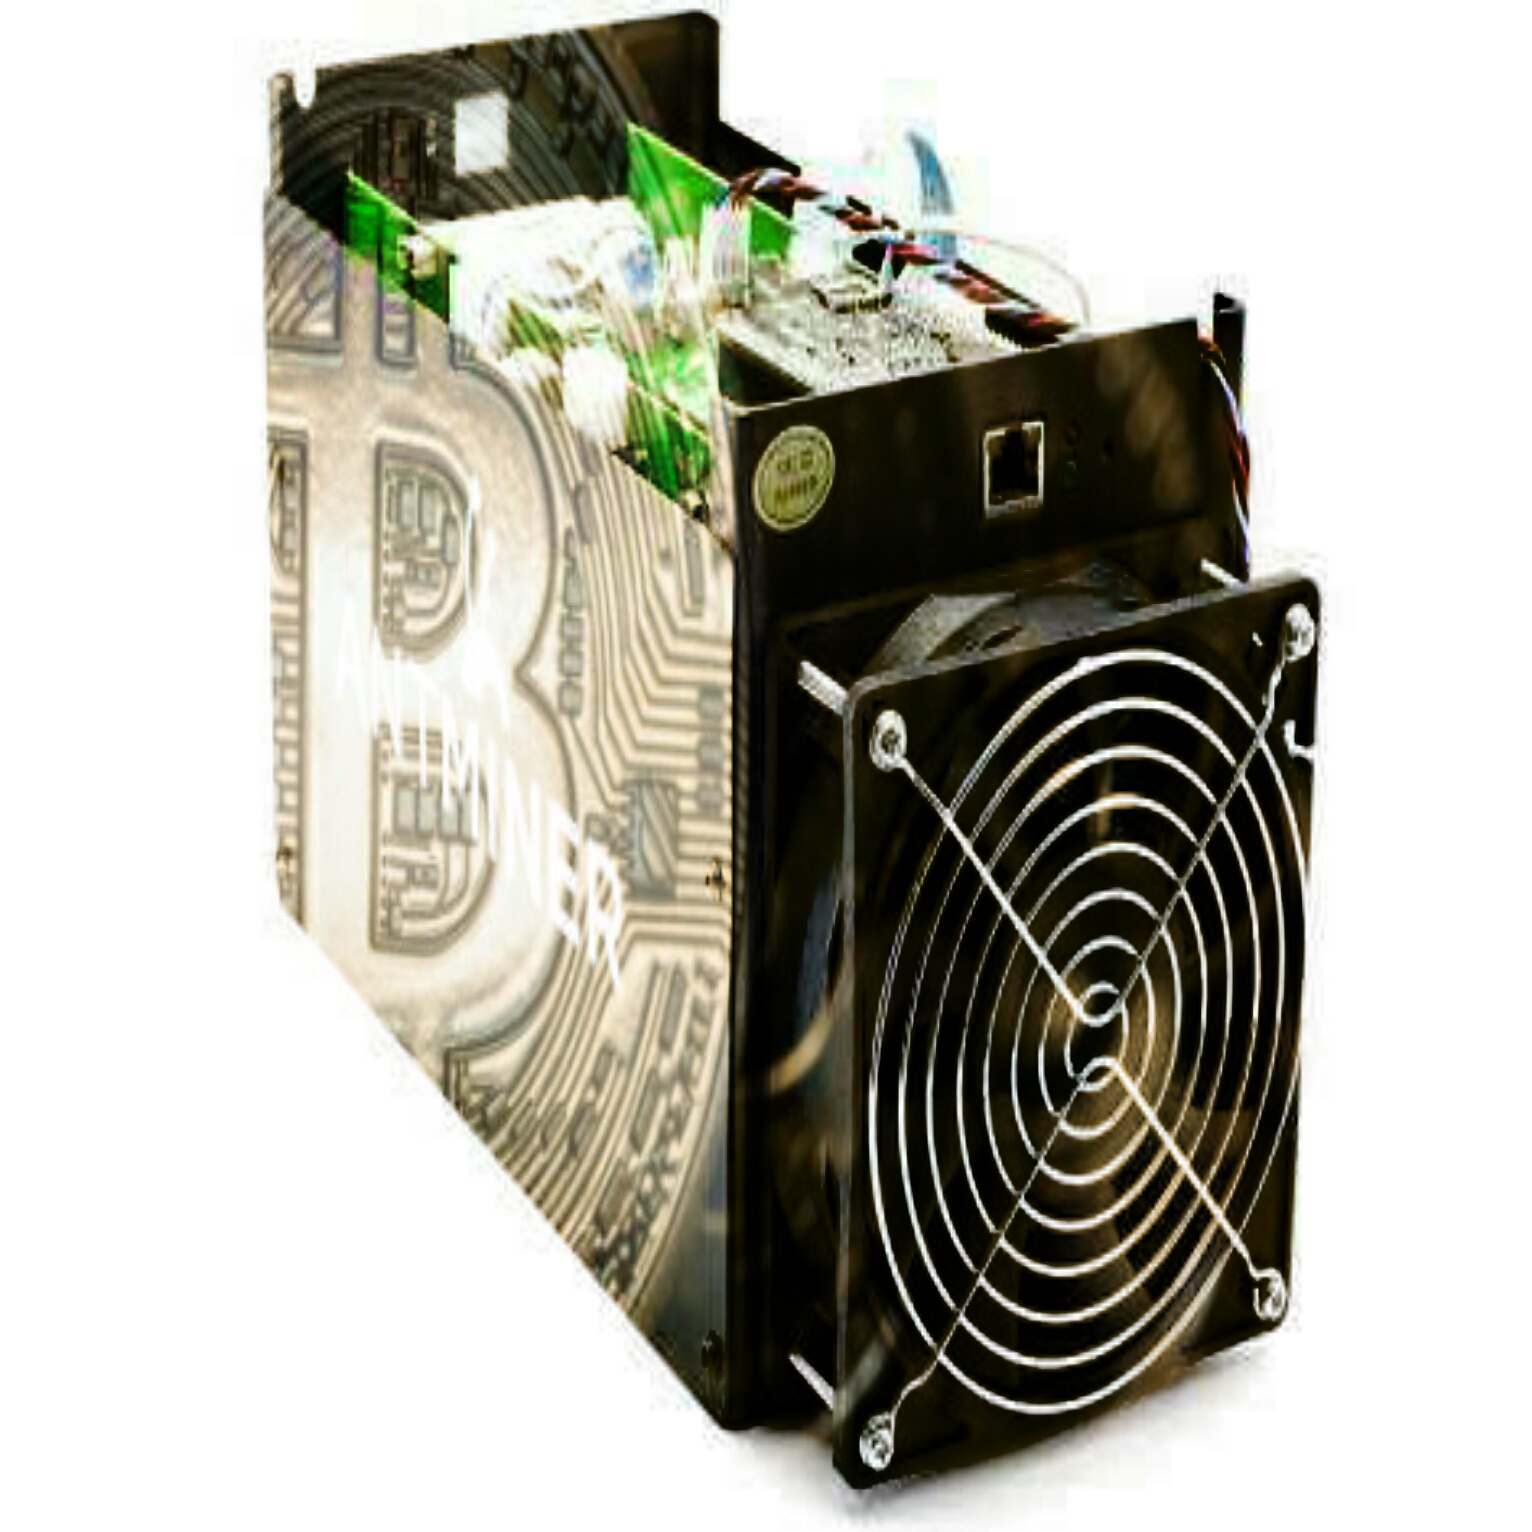 Bitmain Antminer S2 1000 Best Crpyto Currency For Antminer S1 2017 - 